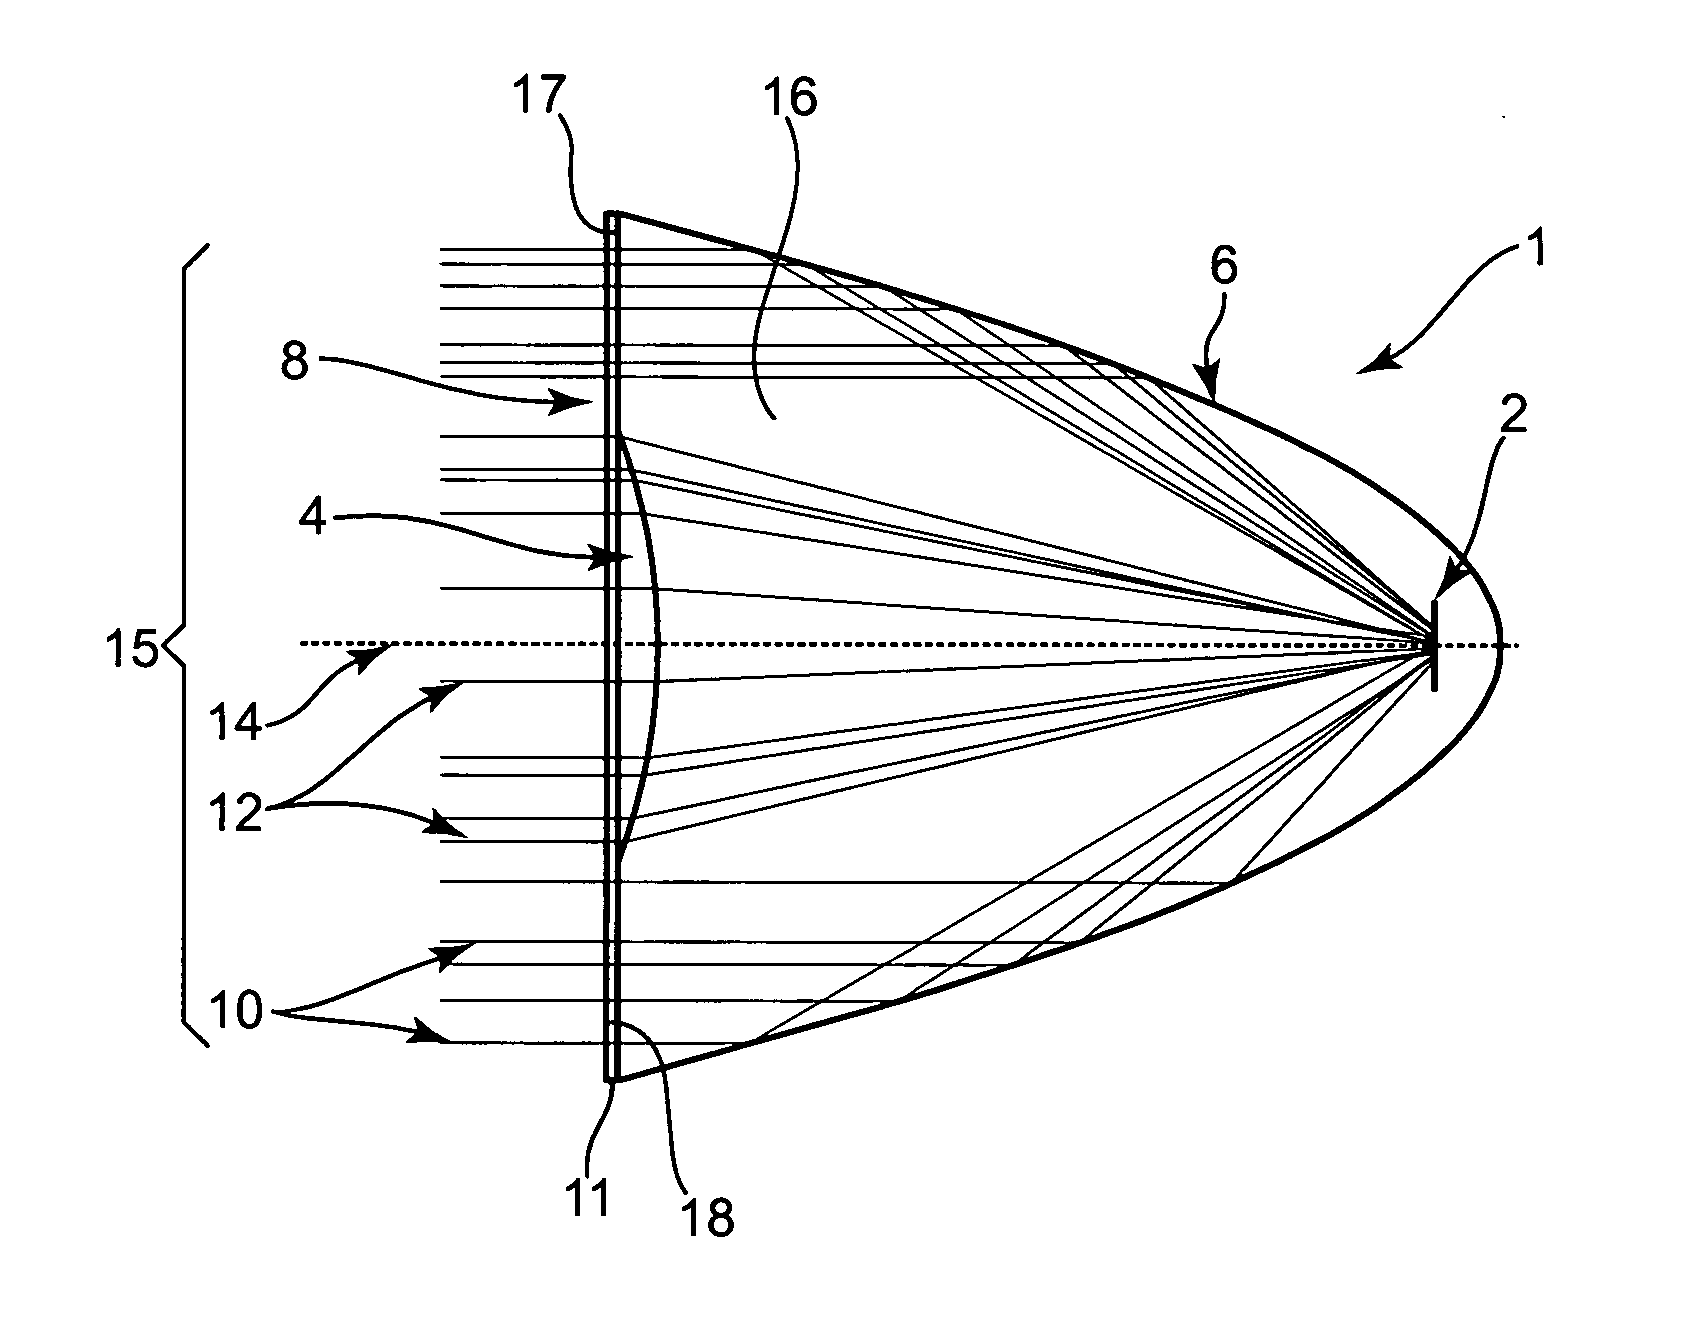 Hybrid primary optical component for optical concentrators